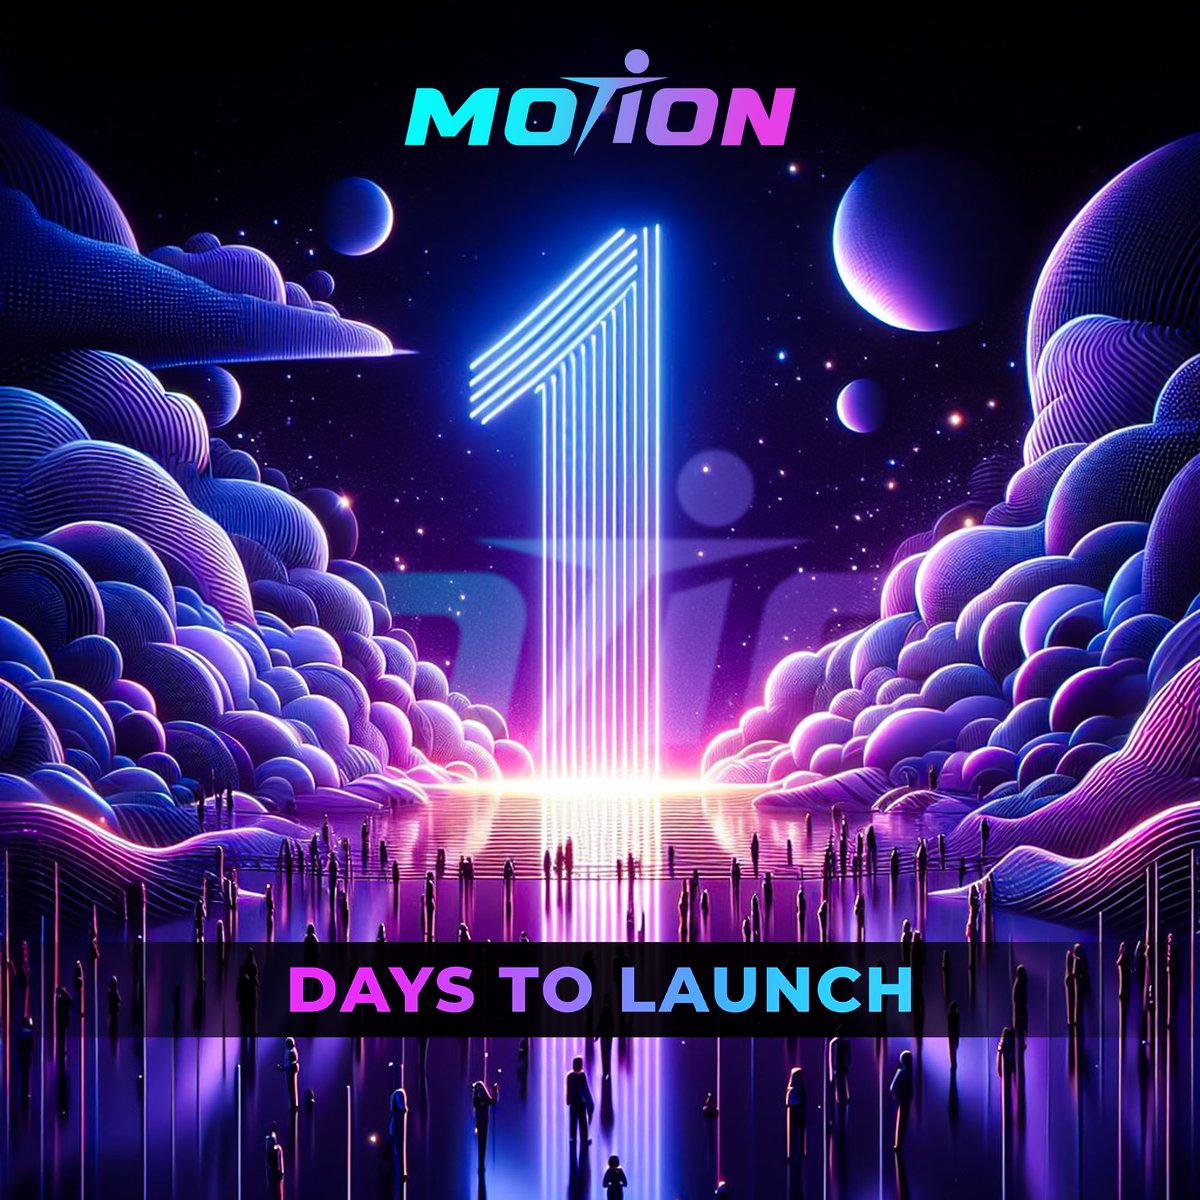 🚀1 DAY TO LAUNCH🚀 🚀 Full bags tradable on launch 🚀 0% Buy 7.5% Sell first 72 hours 🚀 Trade $STC <> $MOTN 🚀 1st #Launch on #SaitaChainBlockchain ⌛️Motion Presale closing tonight presale.themotion.app/dashboard #FitCoach #MotionToken #SaitaChainCoinCommunity #SaitaRealty…